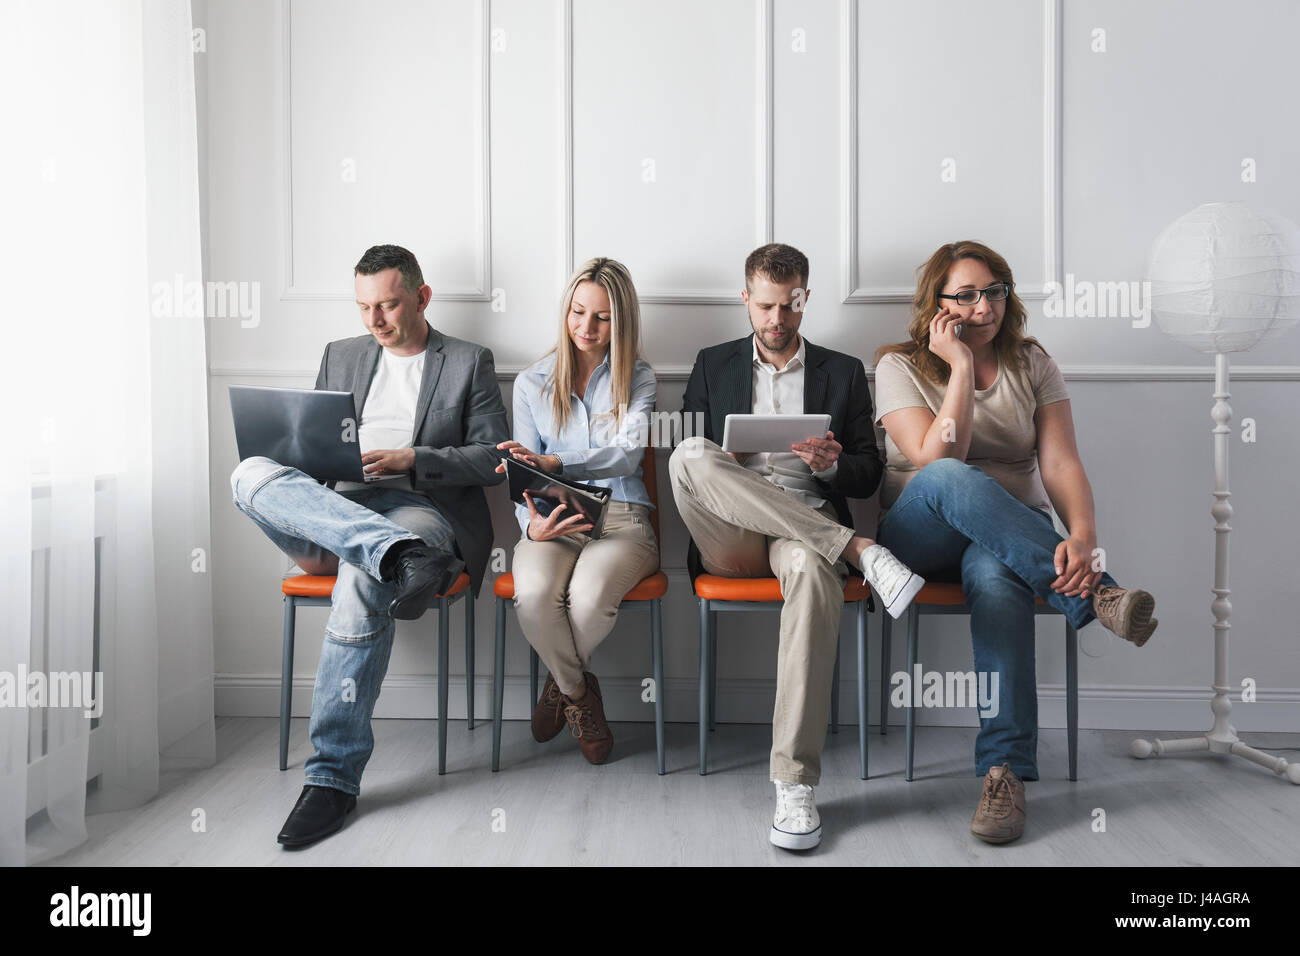 Group of young creative people sitting on chairs in waiting room Stock Photo